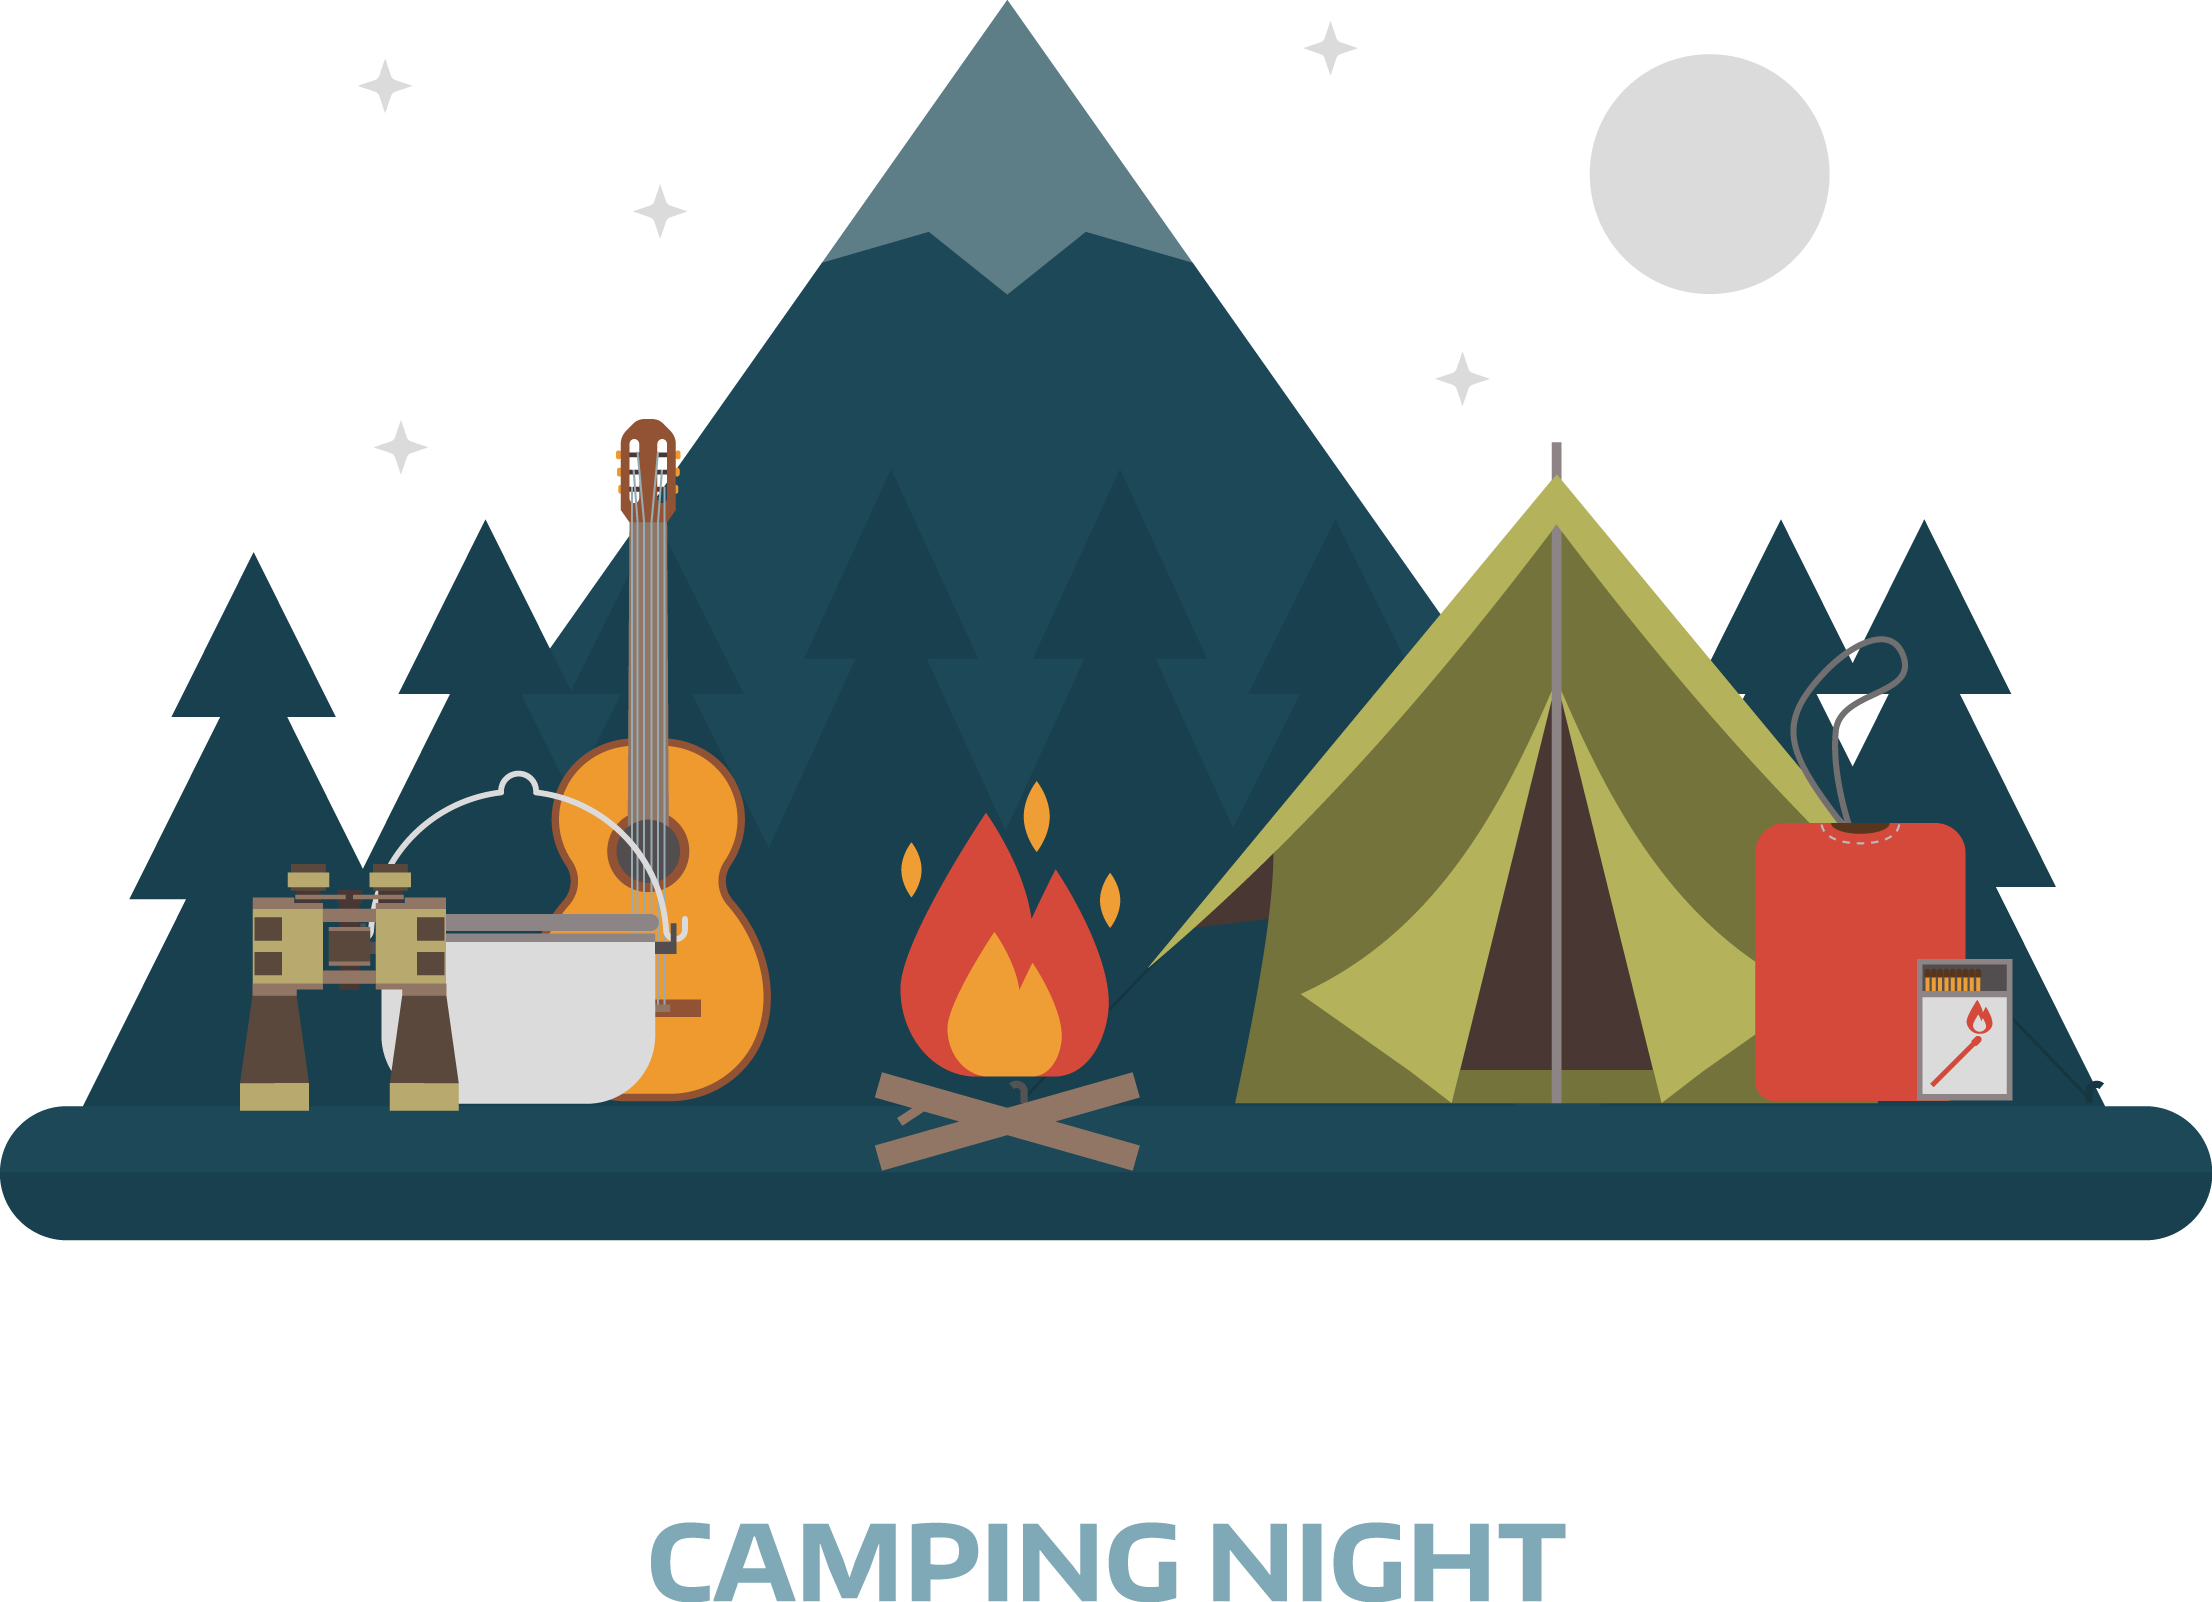 Camping Flat Design Vector Camping Png Download 2212 1602 Free Transparent Camping Png Download Clip Art Library